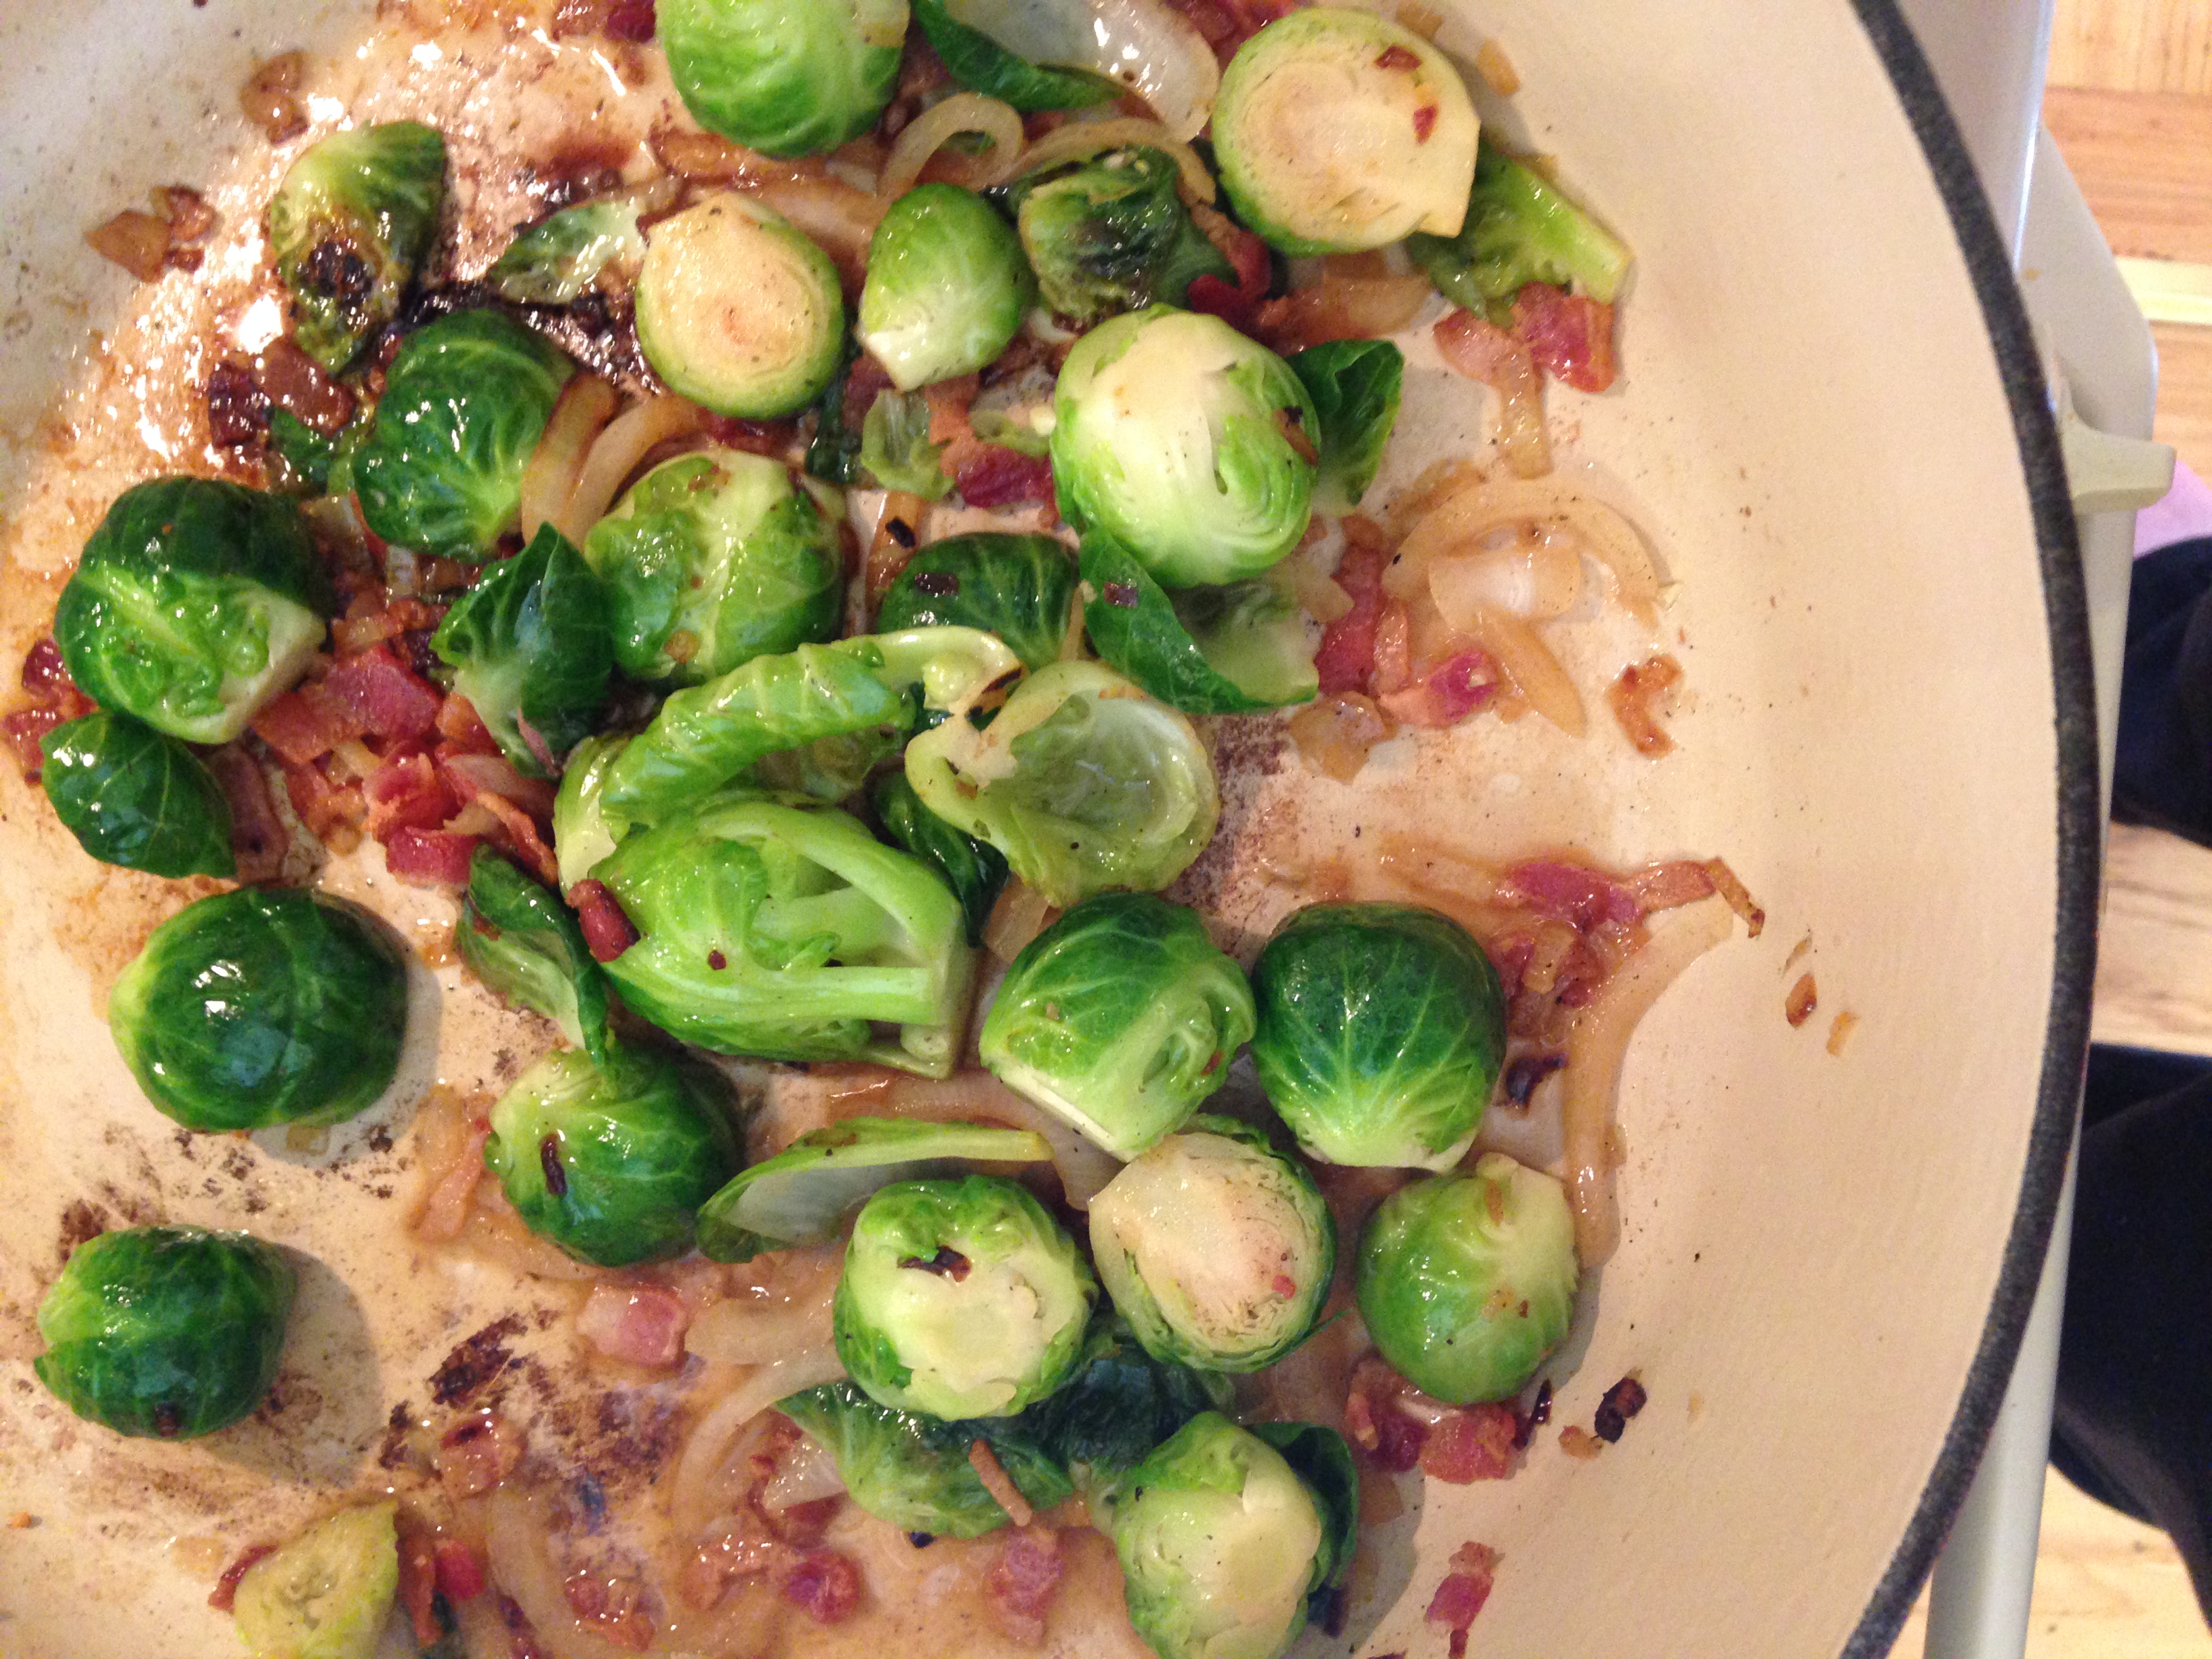 Bacony Brussel Sprouts